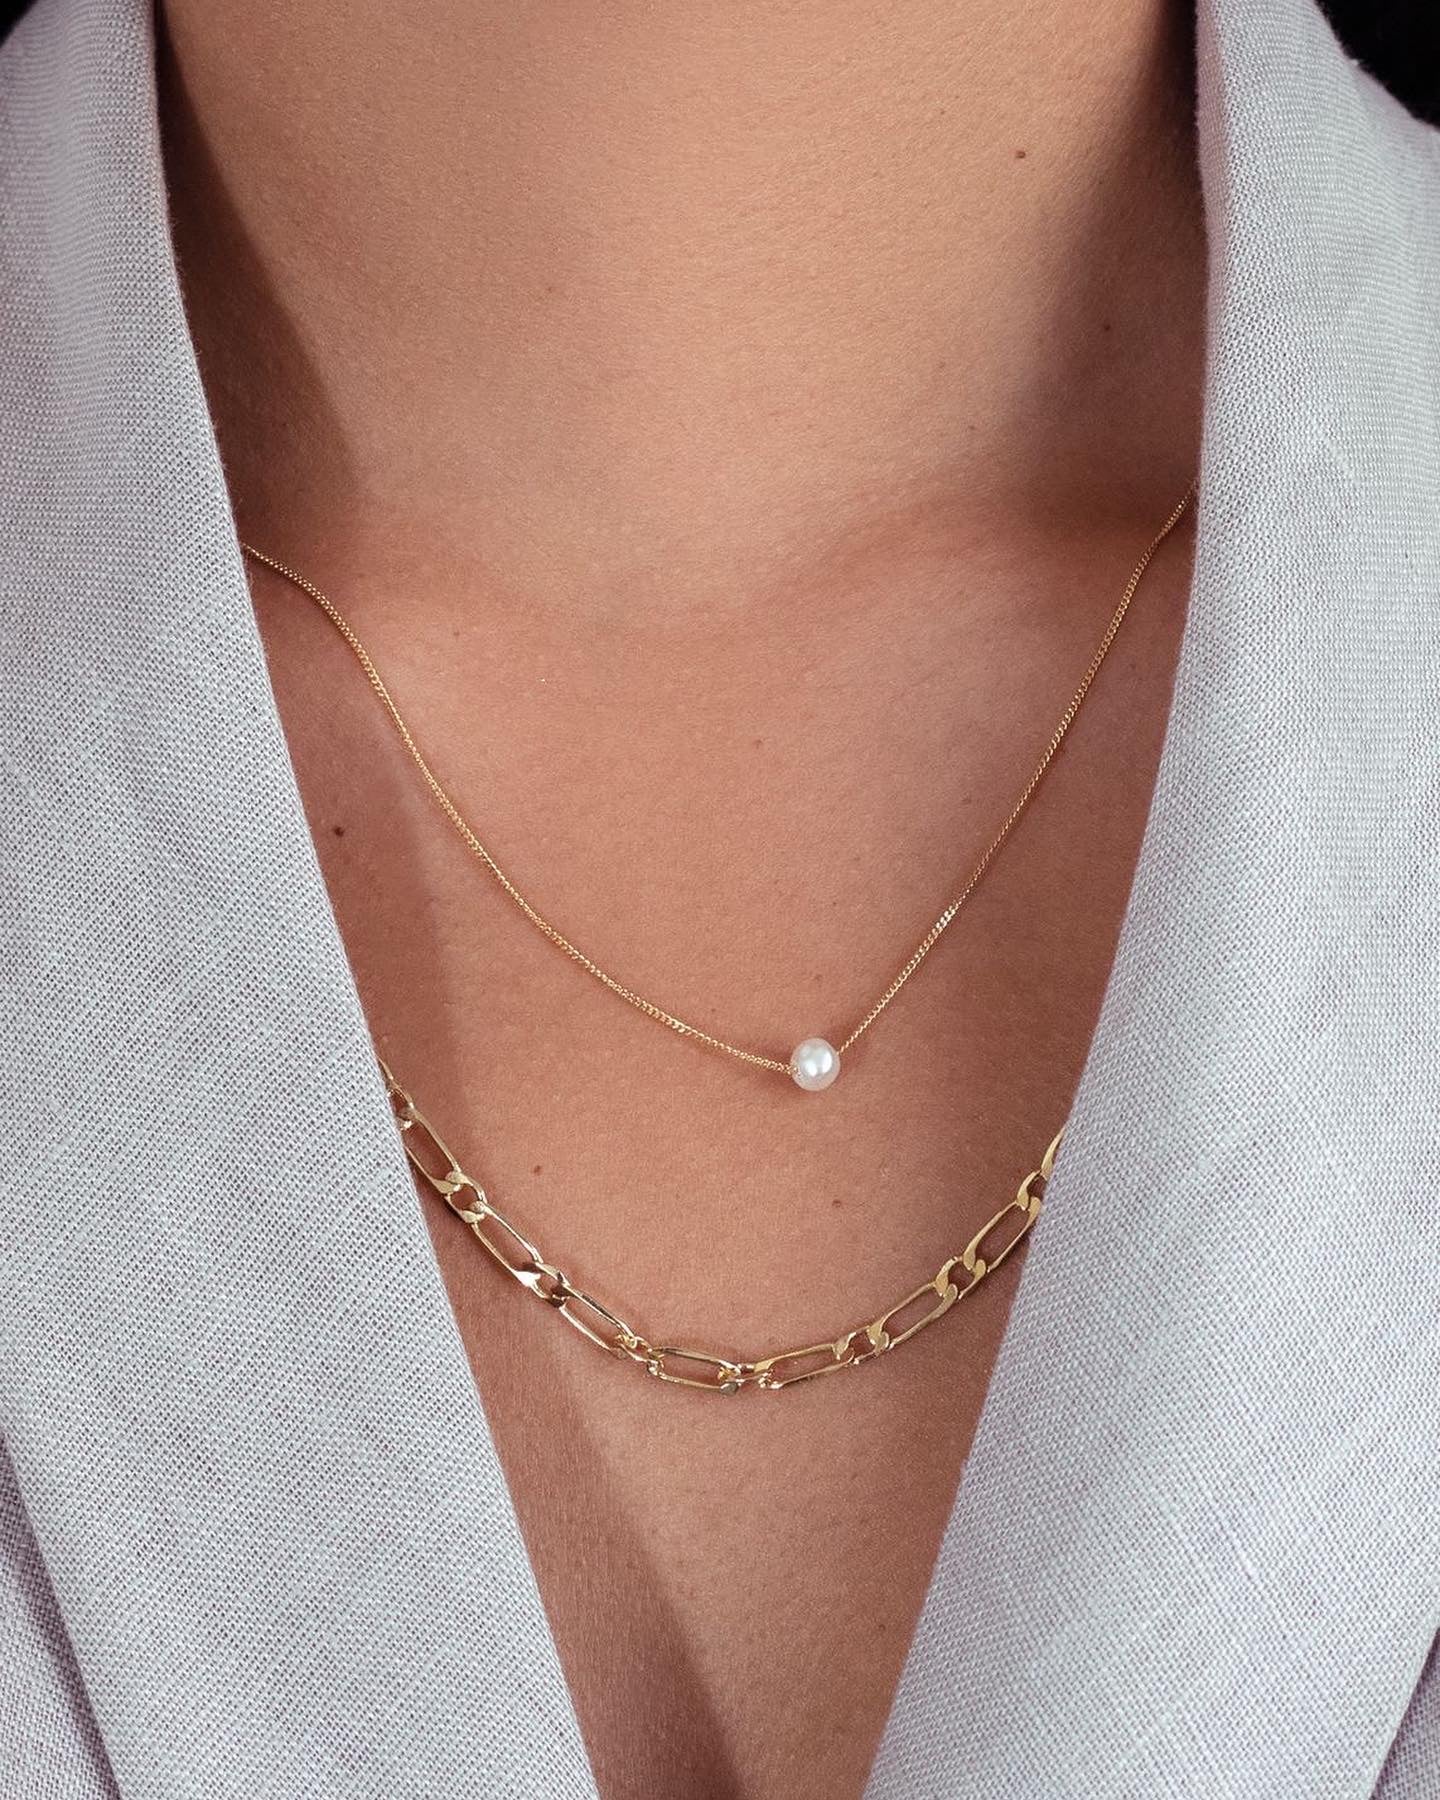 This dainty necklace features an A-grade freshwater pearl gracefully strung on a sterling silver curb chain, creating a classic and timeless look.. model layers her necklaces